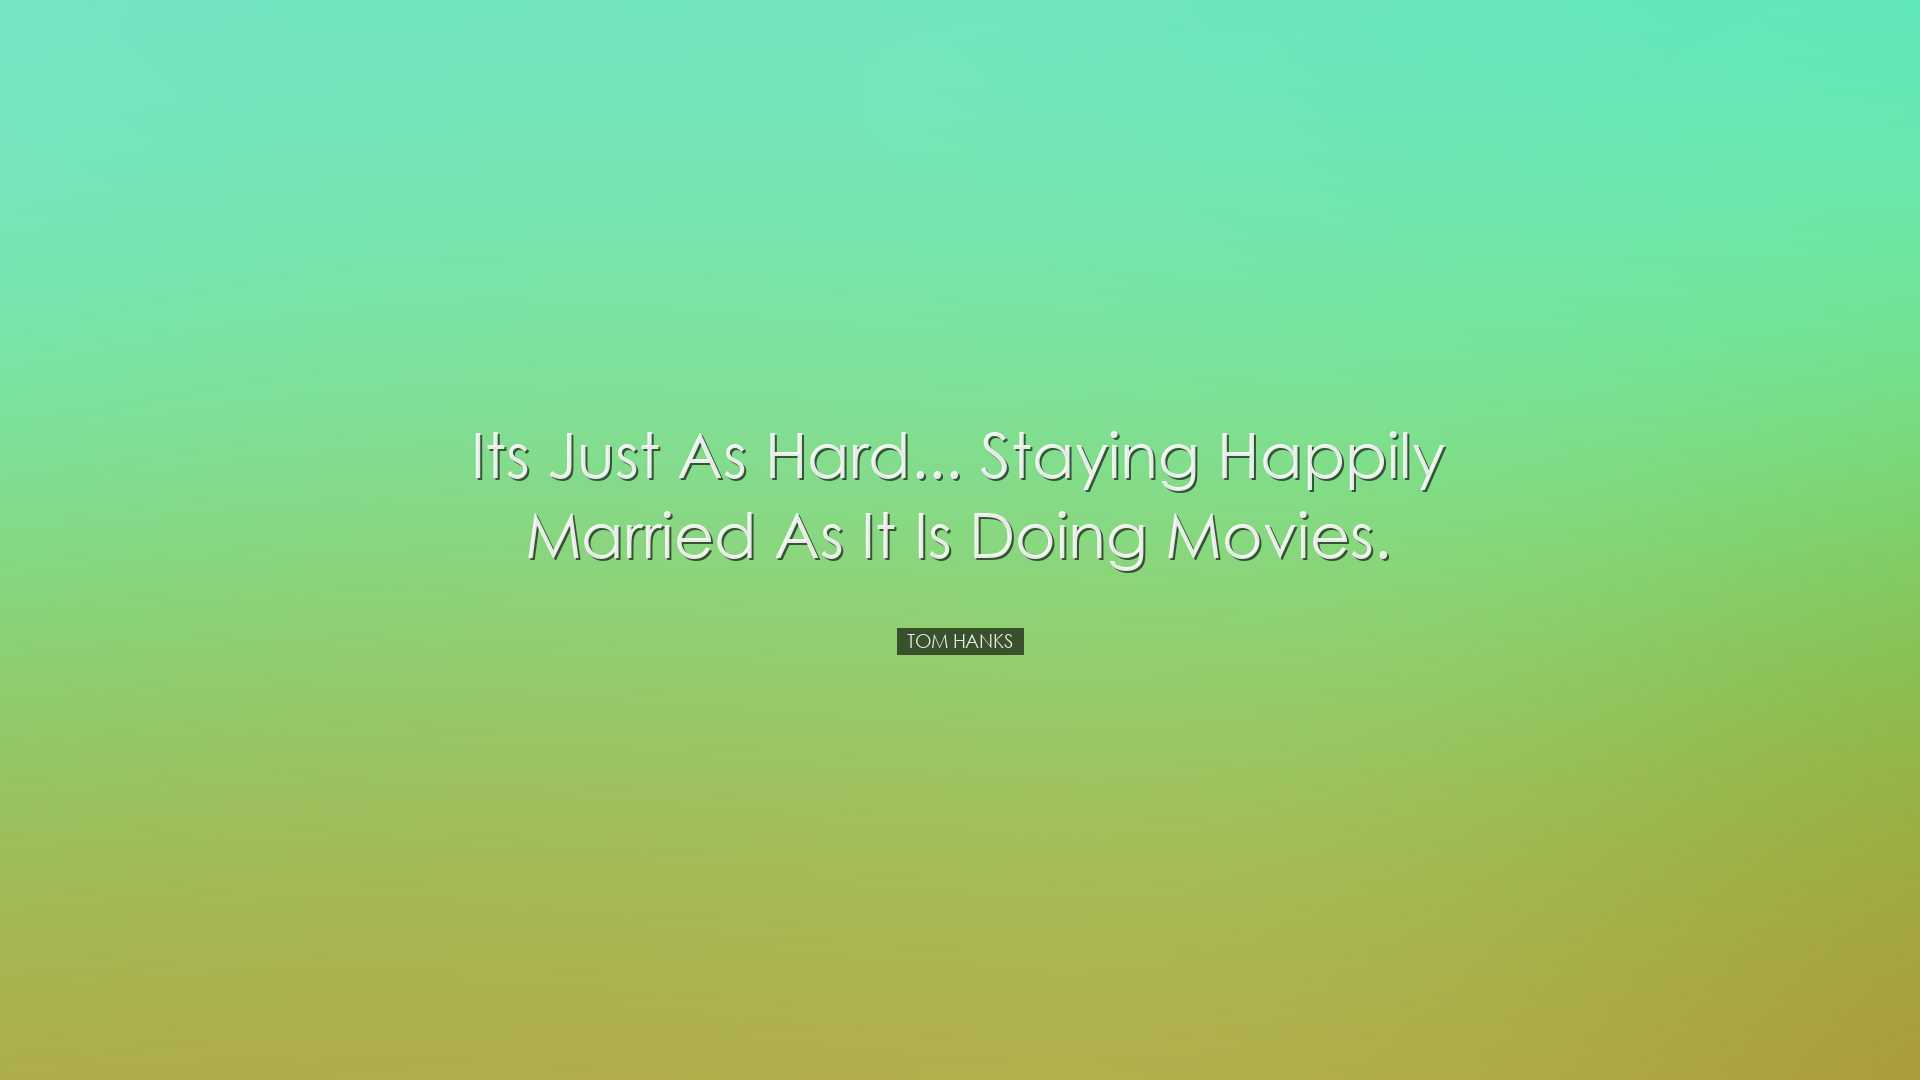 Its just as hard... staying happily married as it is doing movies.